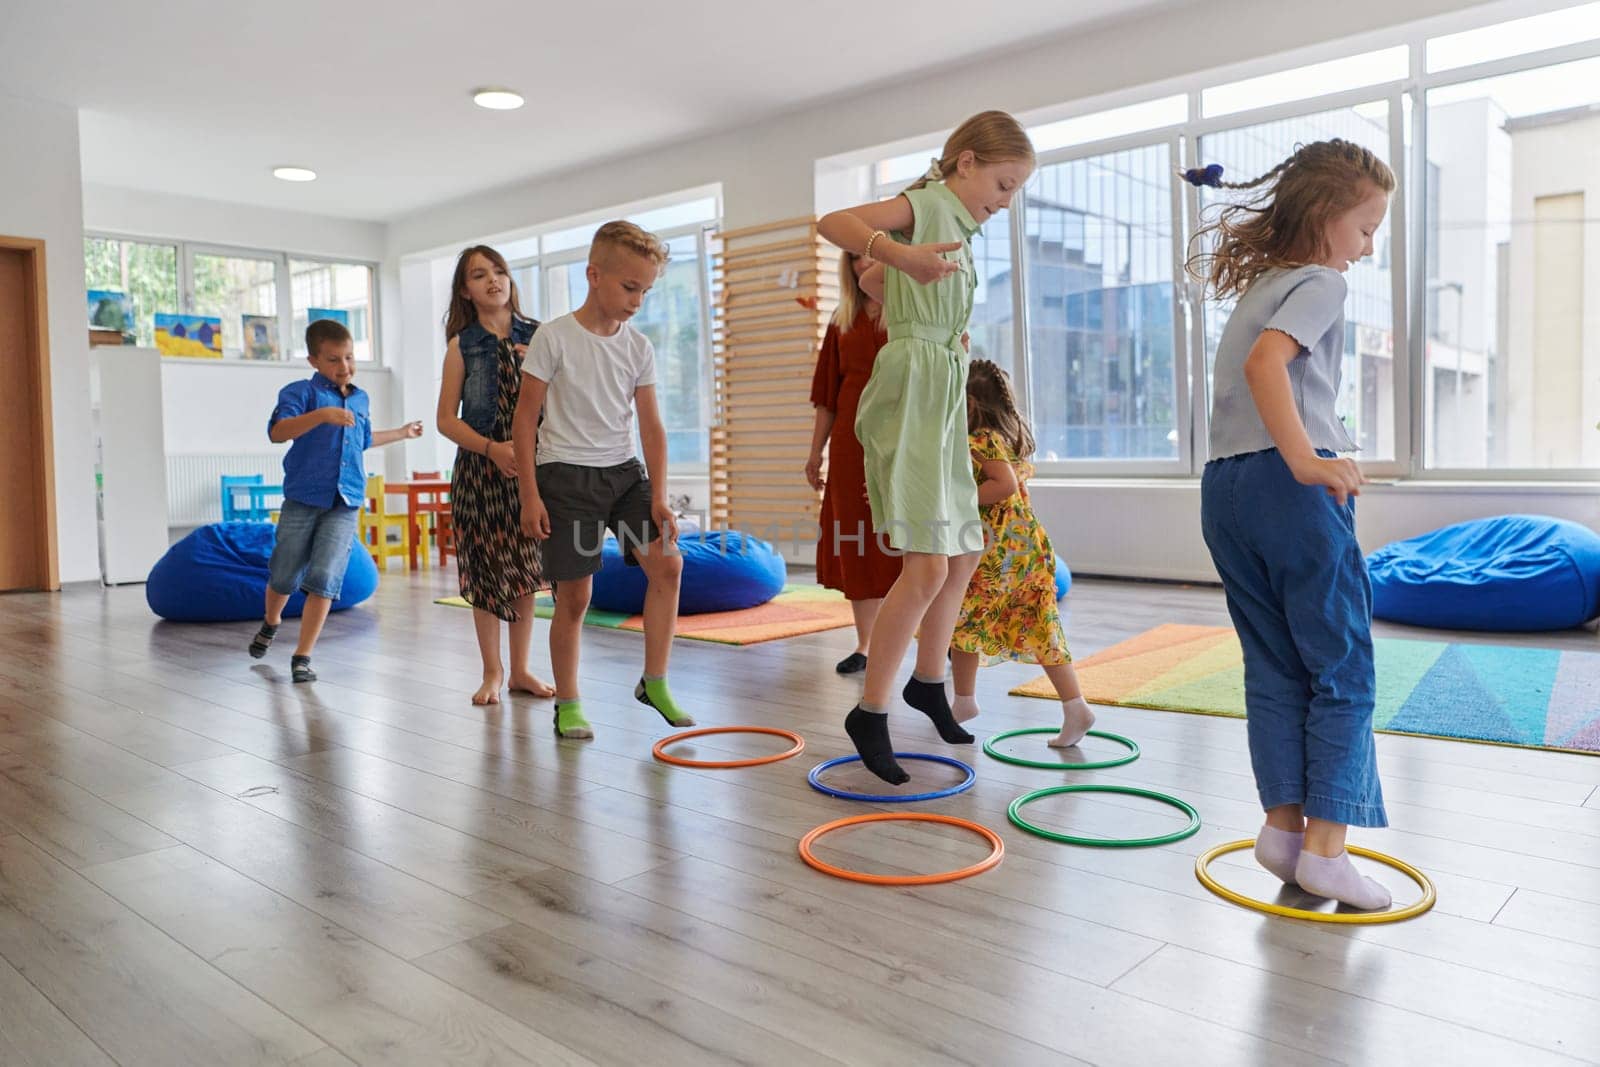 Small nursery school children with female teacher on floor indoors in classroom, doing exercise. Jumping over hula hoop circles track on the floor. by dotshock